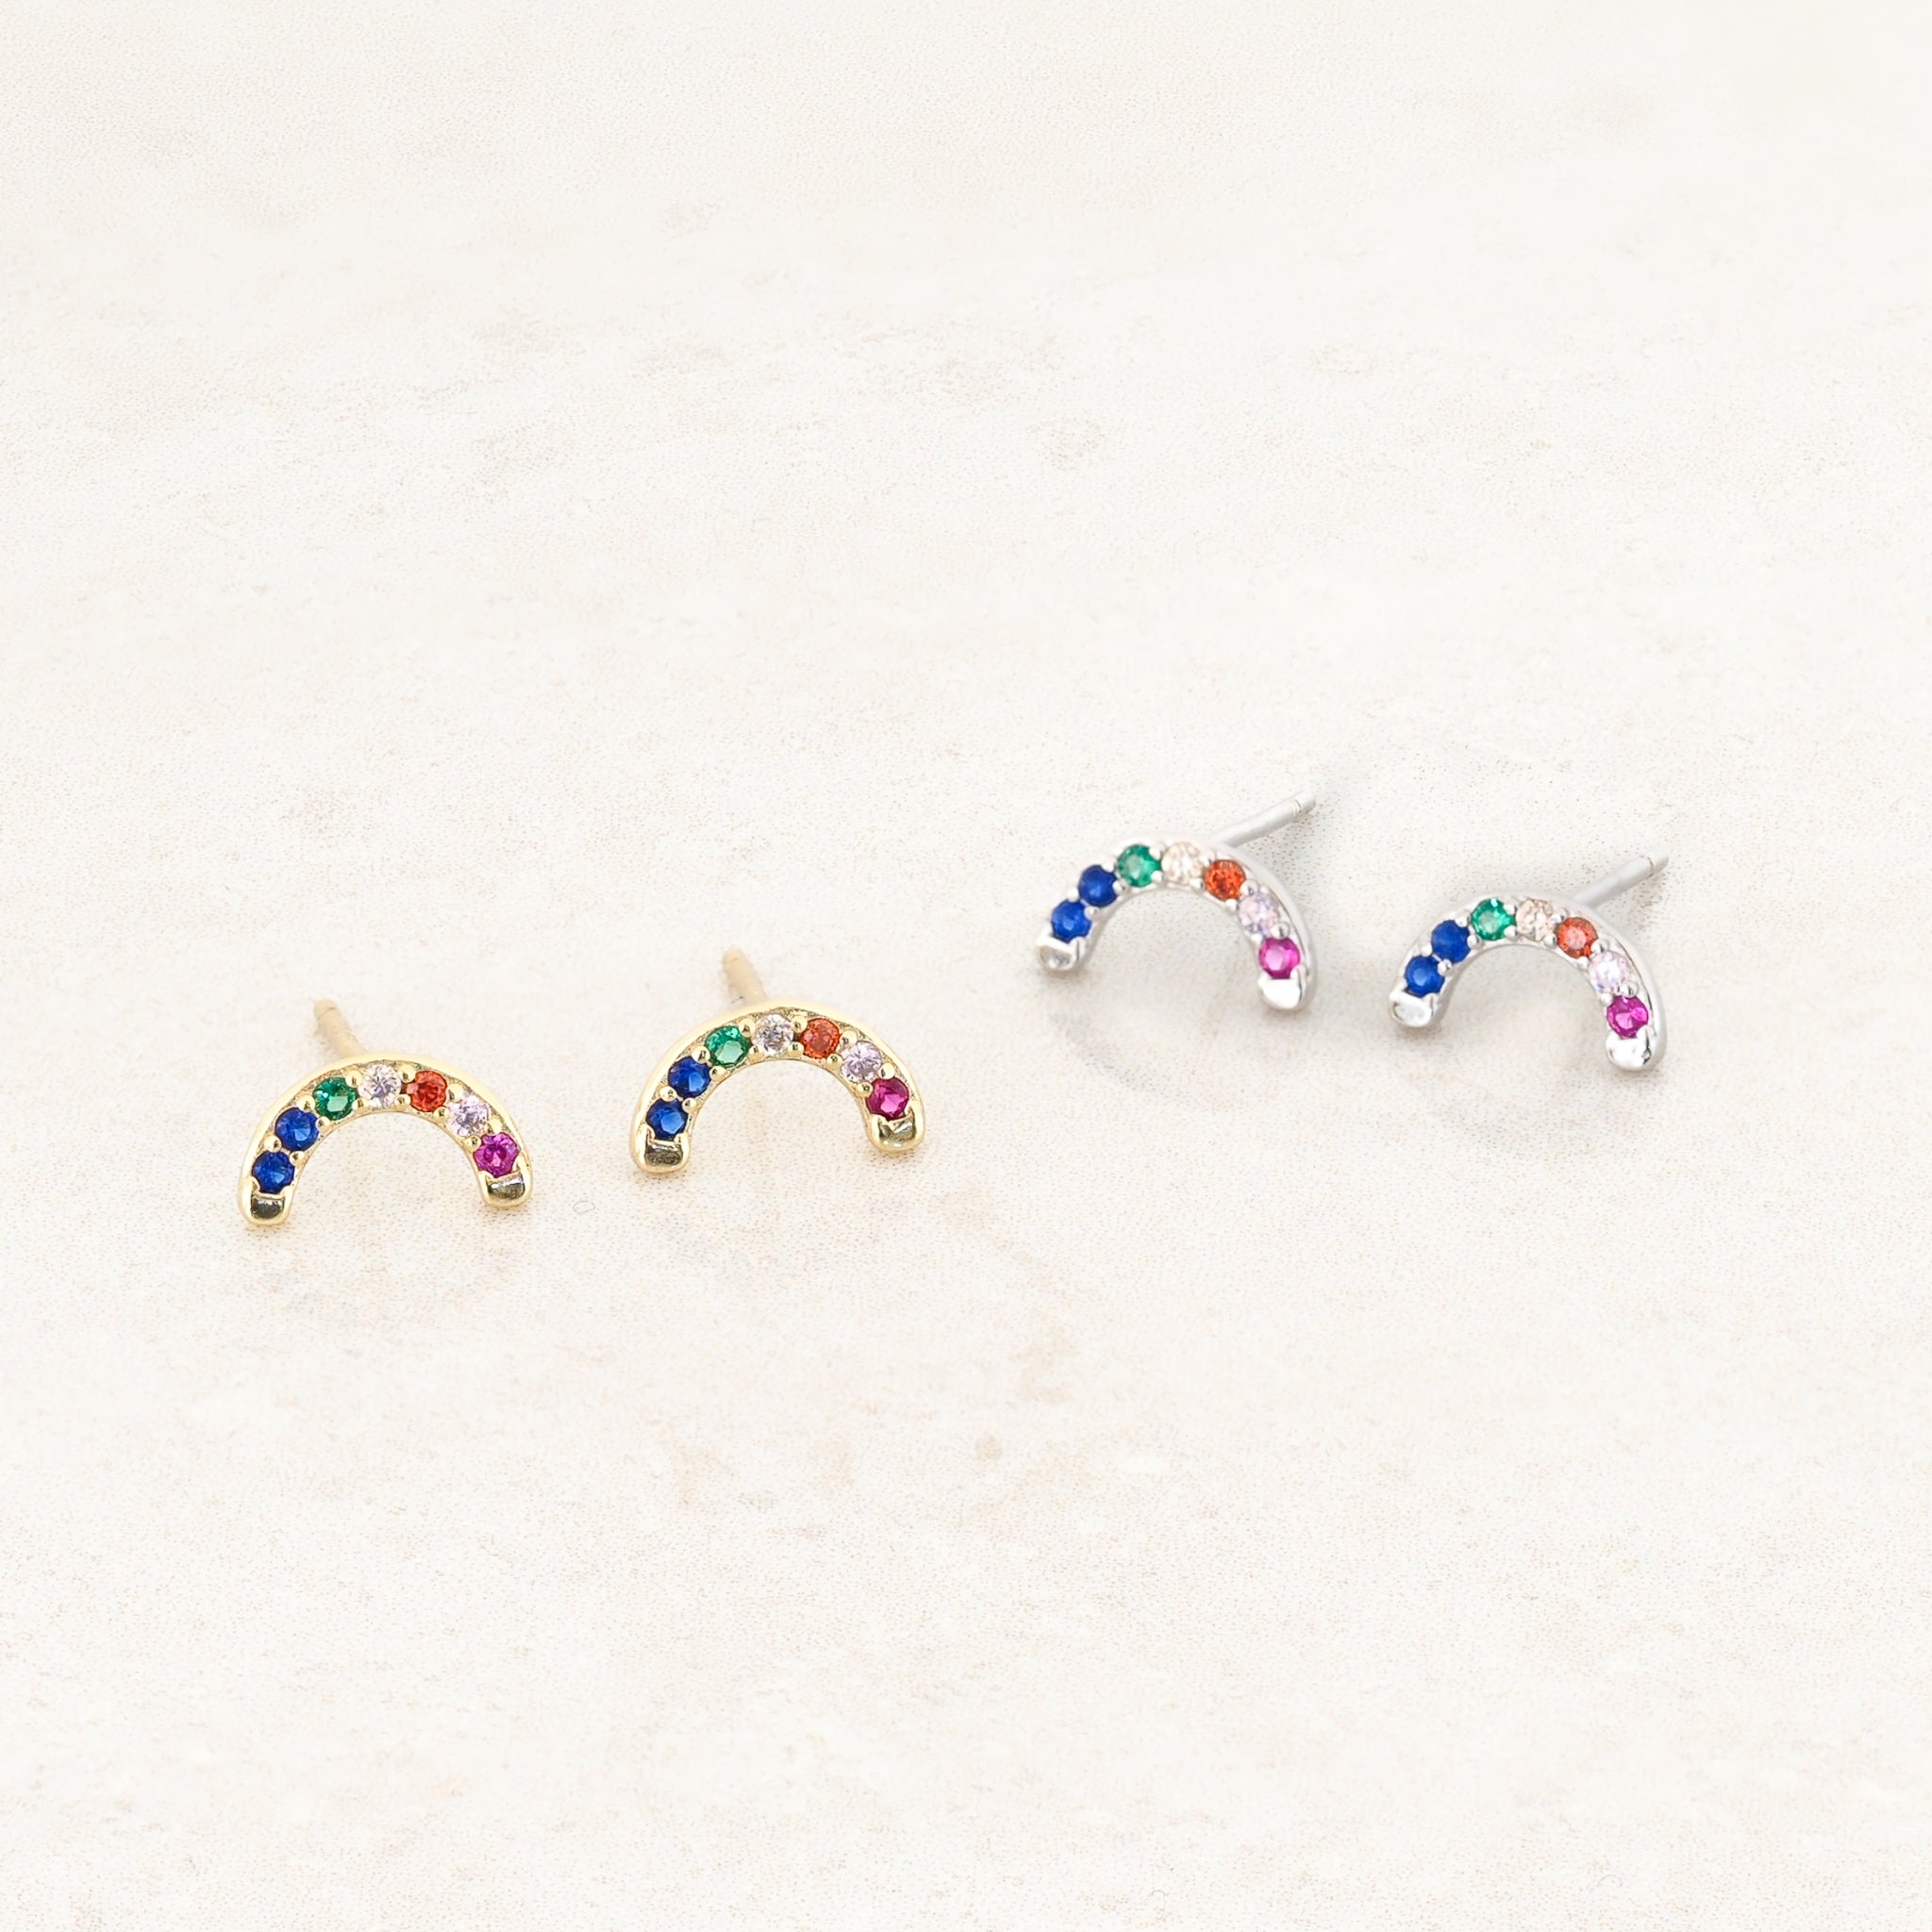 rainbow colour and rainbow shape earrings - pride jewellery collection - both